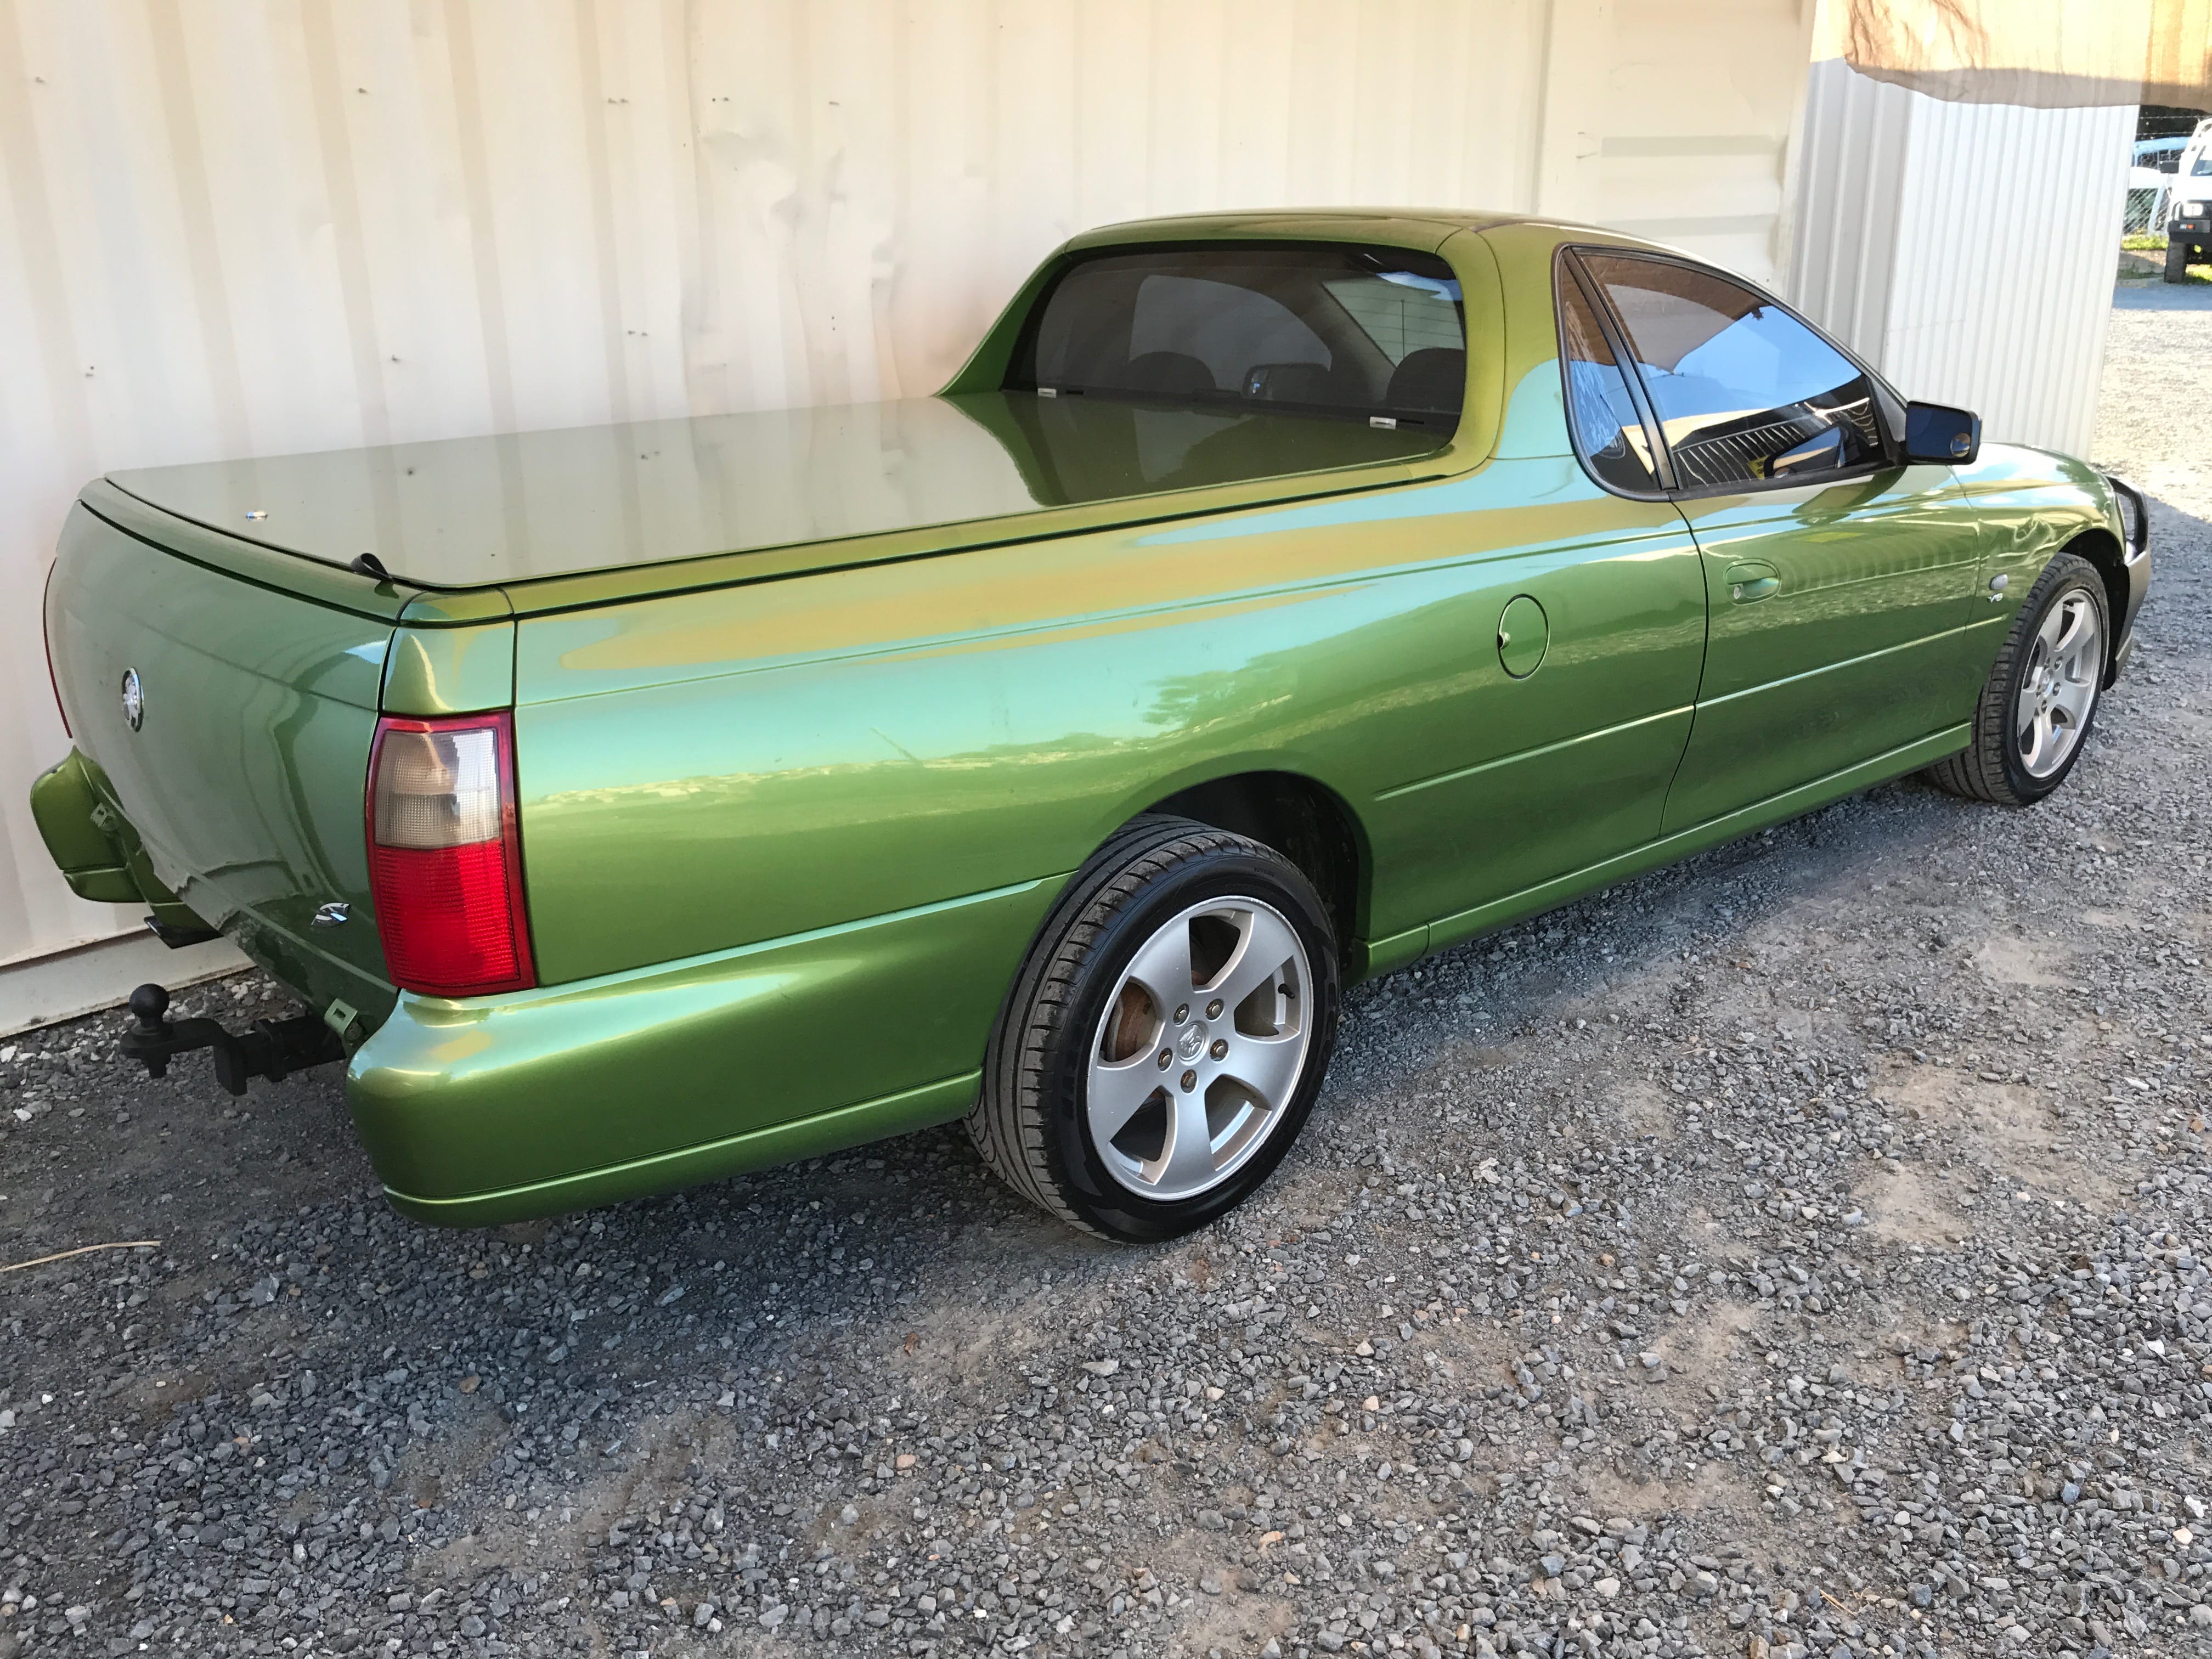 Holden Commodore Ute VY 2003 Green 8-min